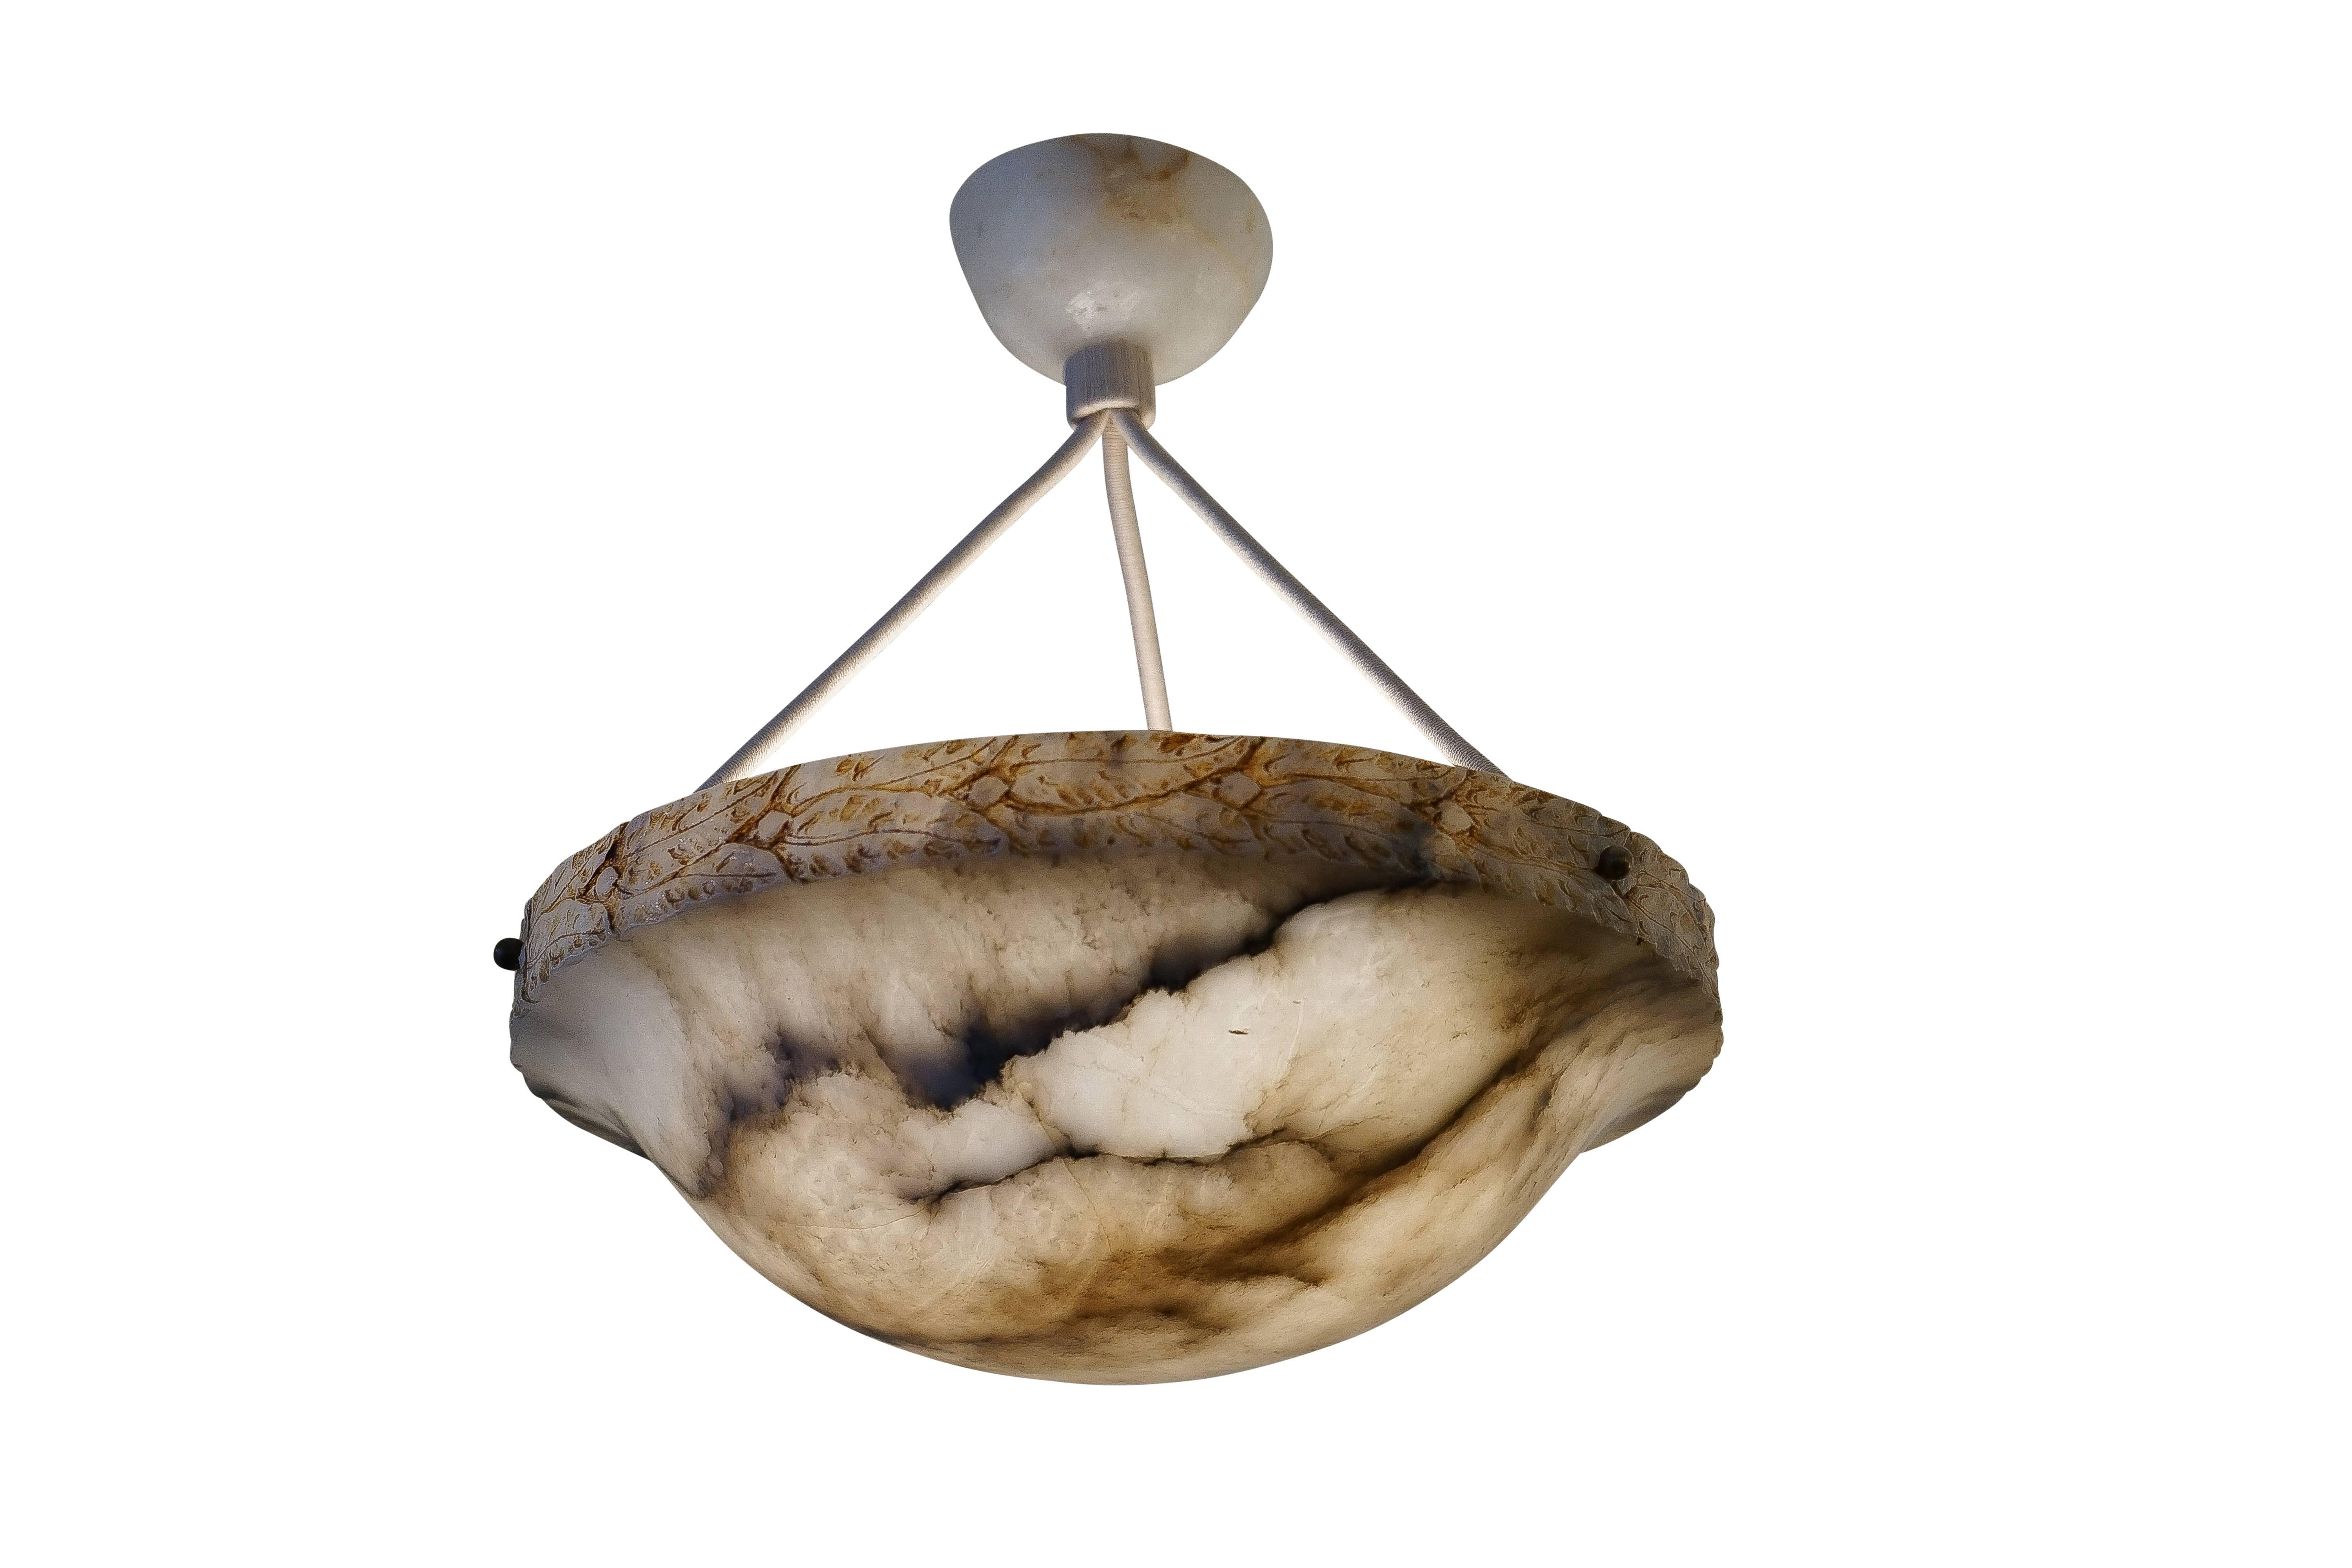 This petite light fixture has it all: Creamy white alabaster, deep mineral veining, a crisp hard edge wreathed with laurel, curving into a deep bowl. Holding three 25 watt incandescent bulbs or three led bulbs of any wattage, this is perfect for a